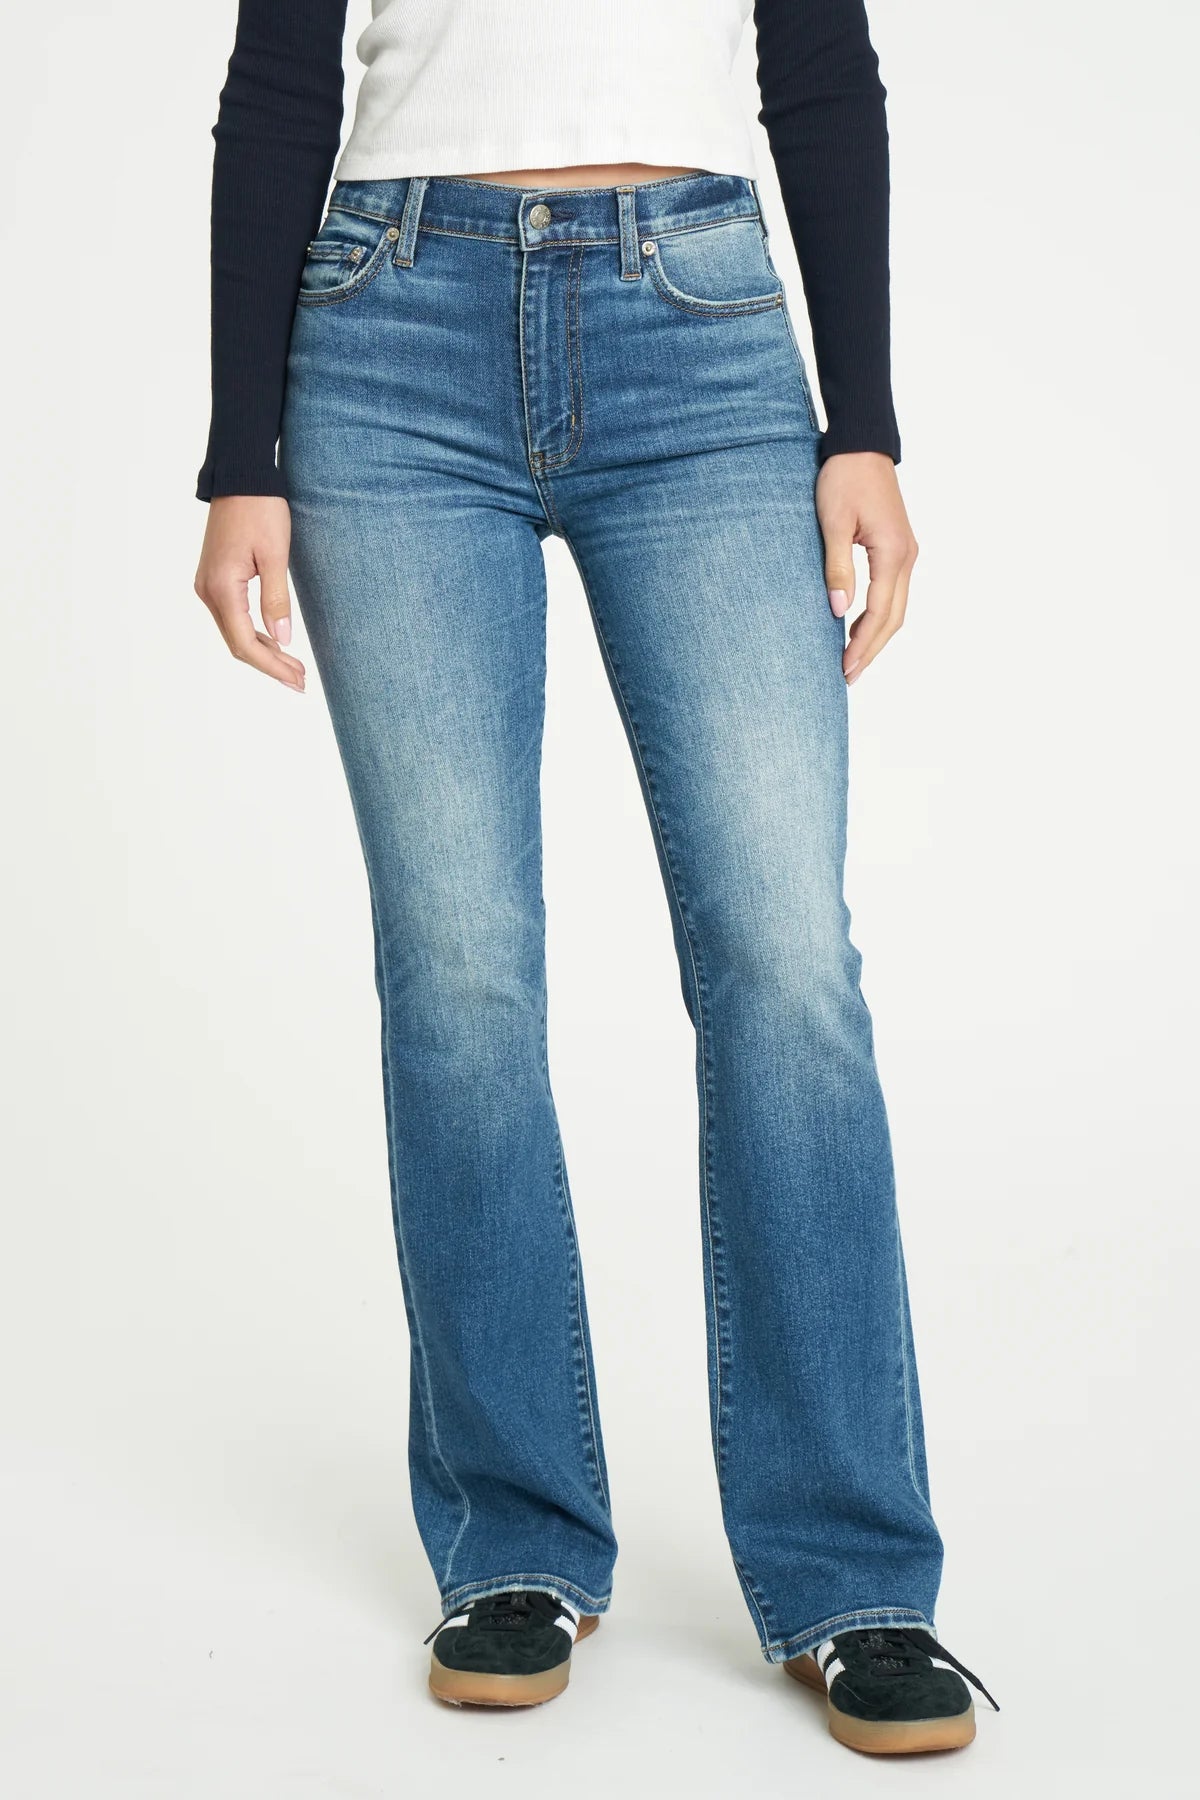 Covergirl Mid Rise Bootcut in Perfection